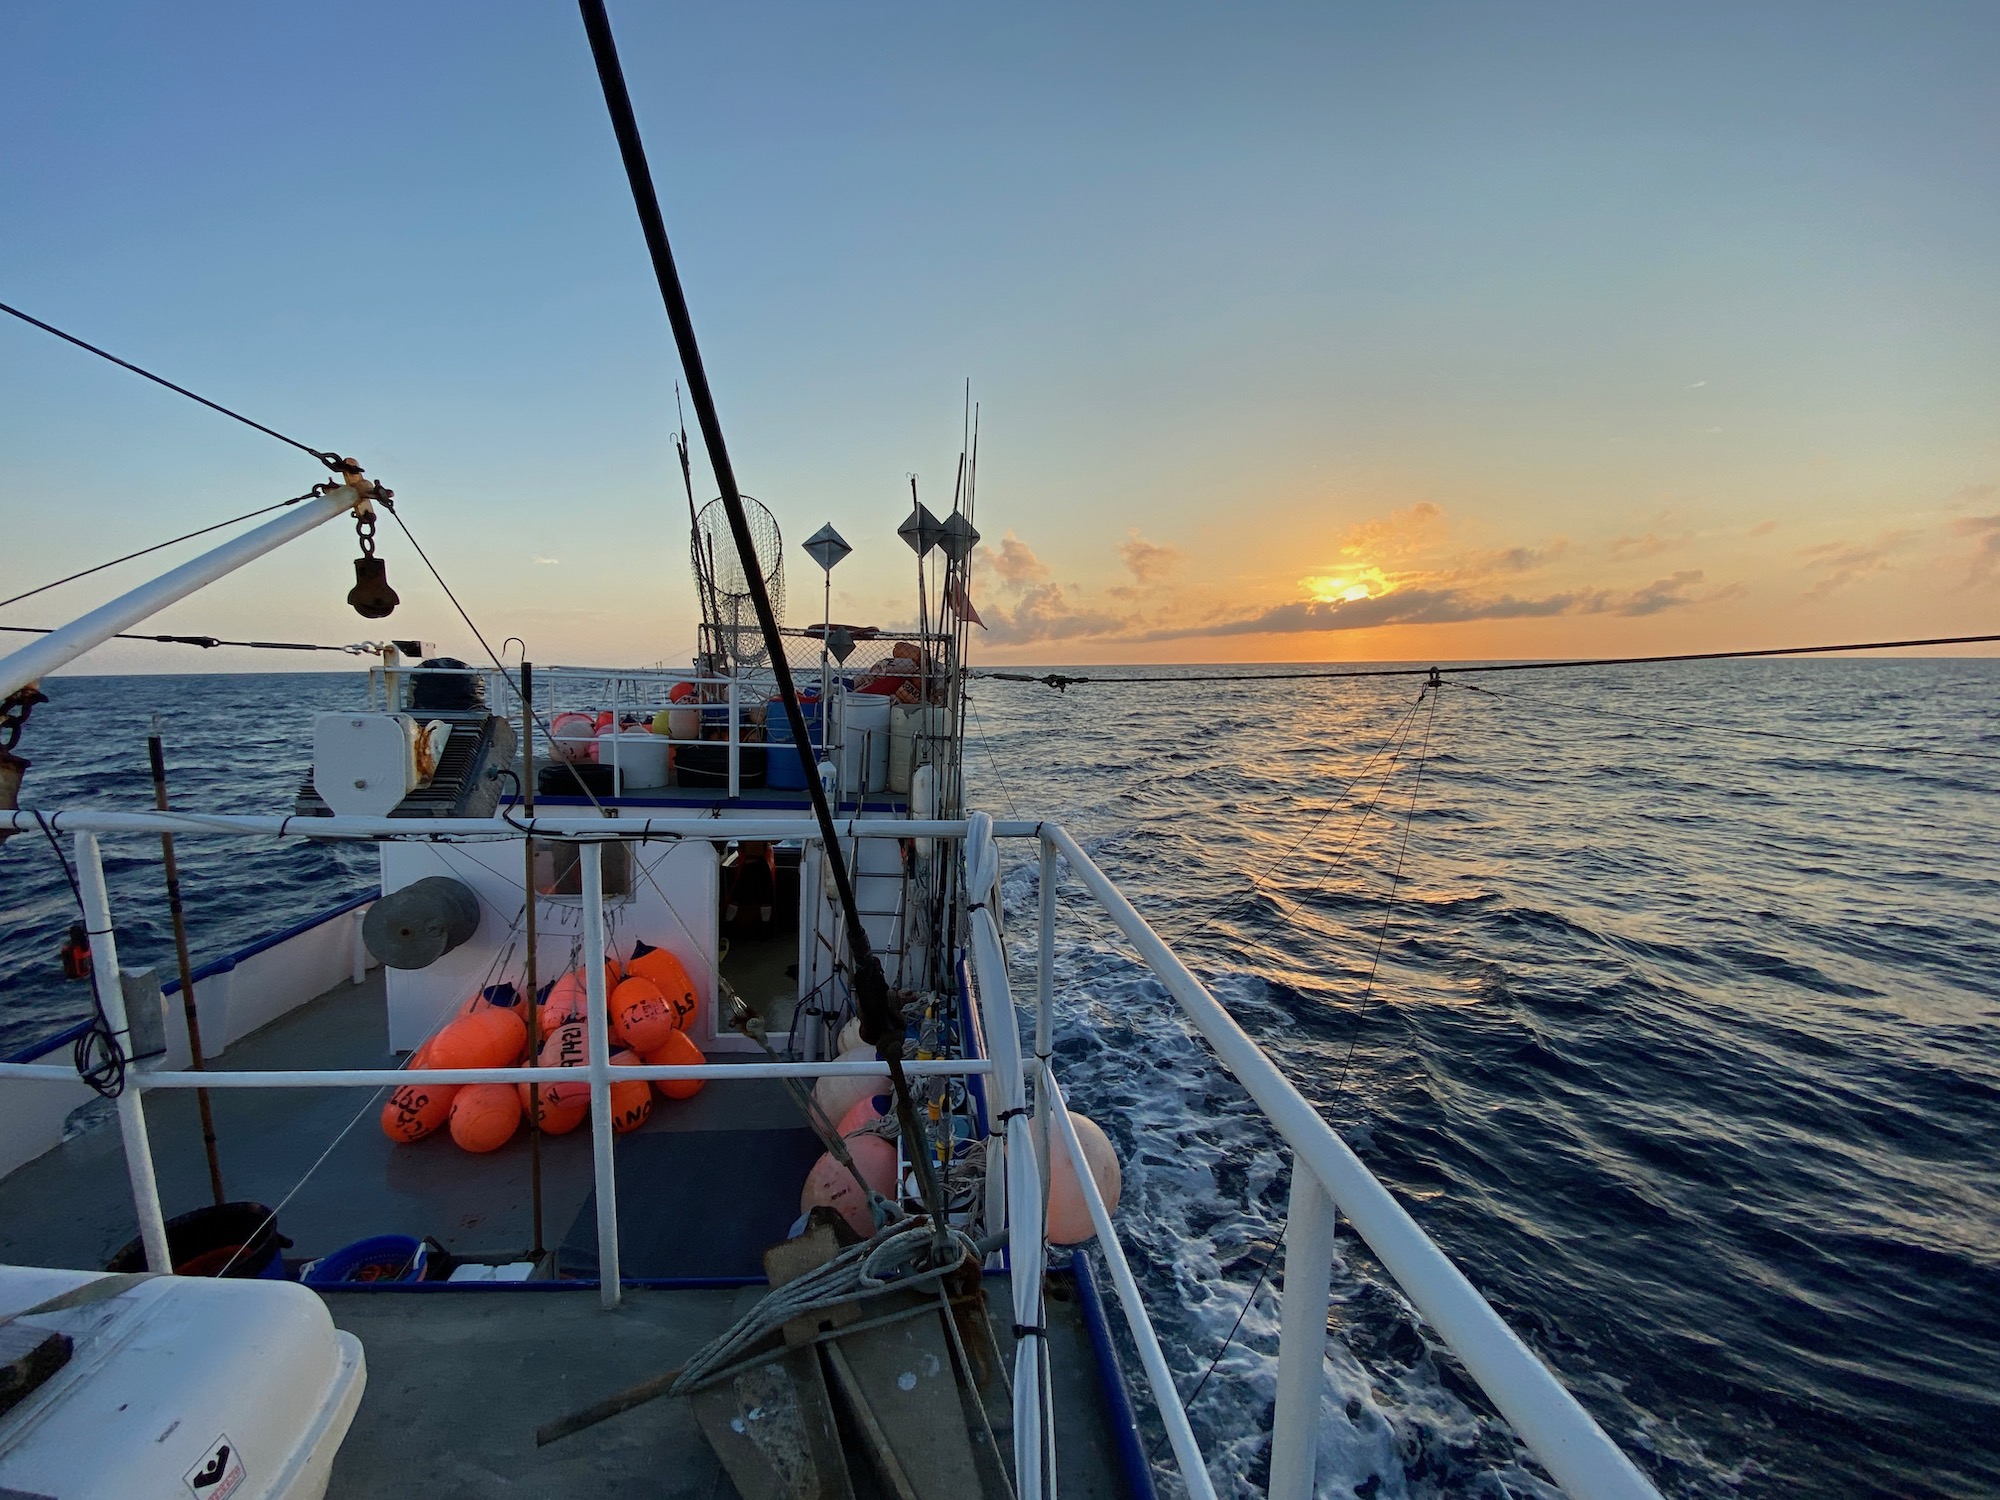 Sunrise view from the deck of F/V Monica, a commercial longliner that Ocean Twilight Zone project scientists used to study large marine predators as part of a multi-vessel research cruise in August 2022. (Photo by Camrin Braun, © Woods Hole Oceanographic Institution) 